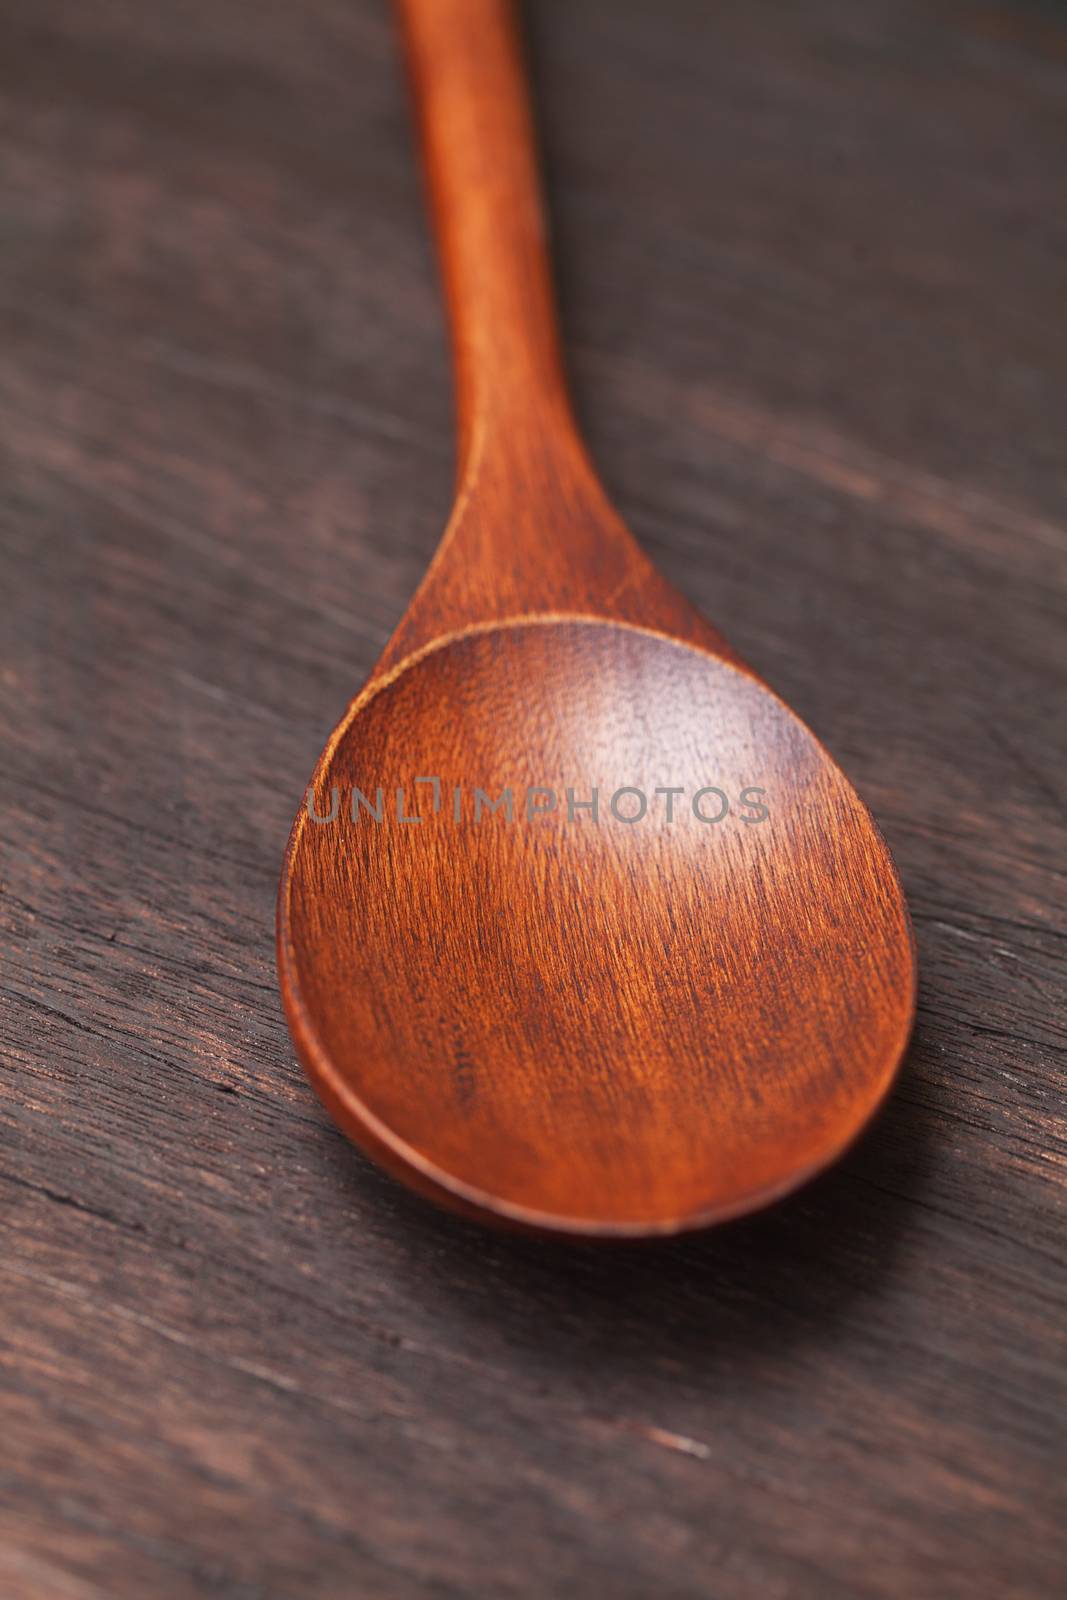 wooden spoon on a wooden surface